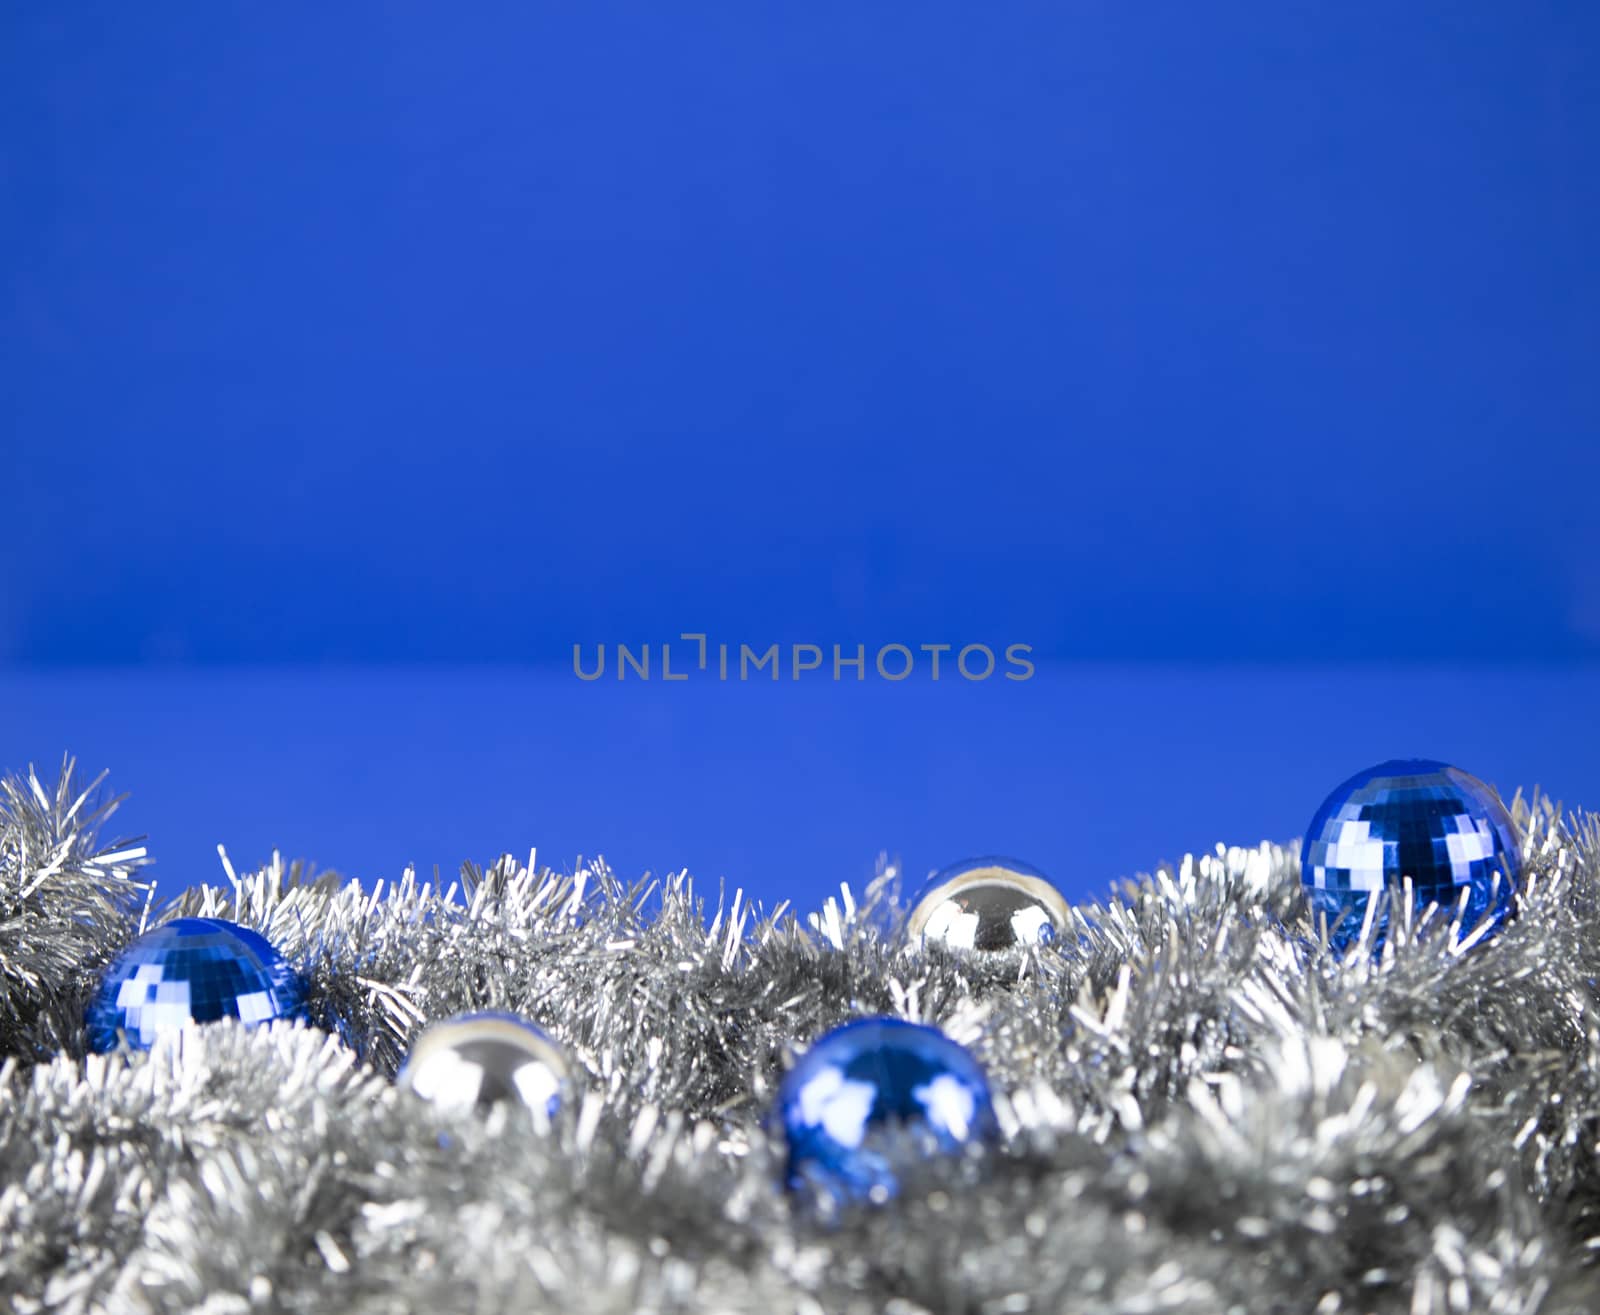 Christmas copy space with blue and silver bright baubles in silver decorative chain garland on blue background with bokeh effect